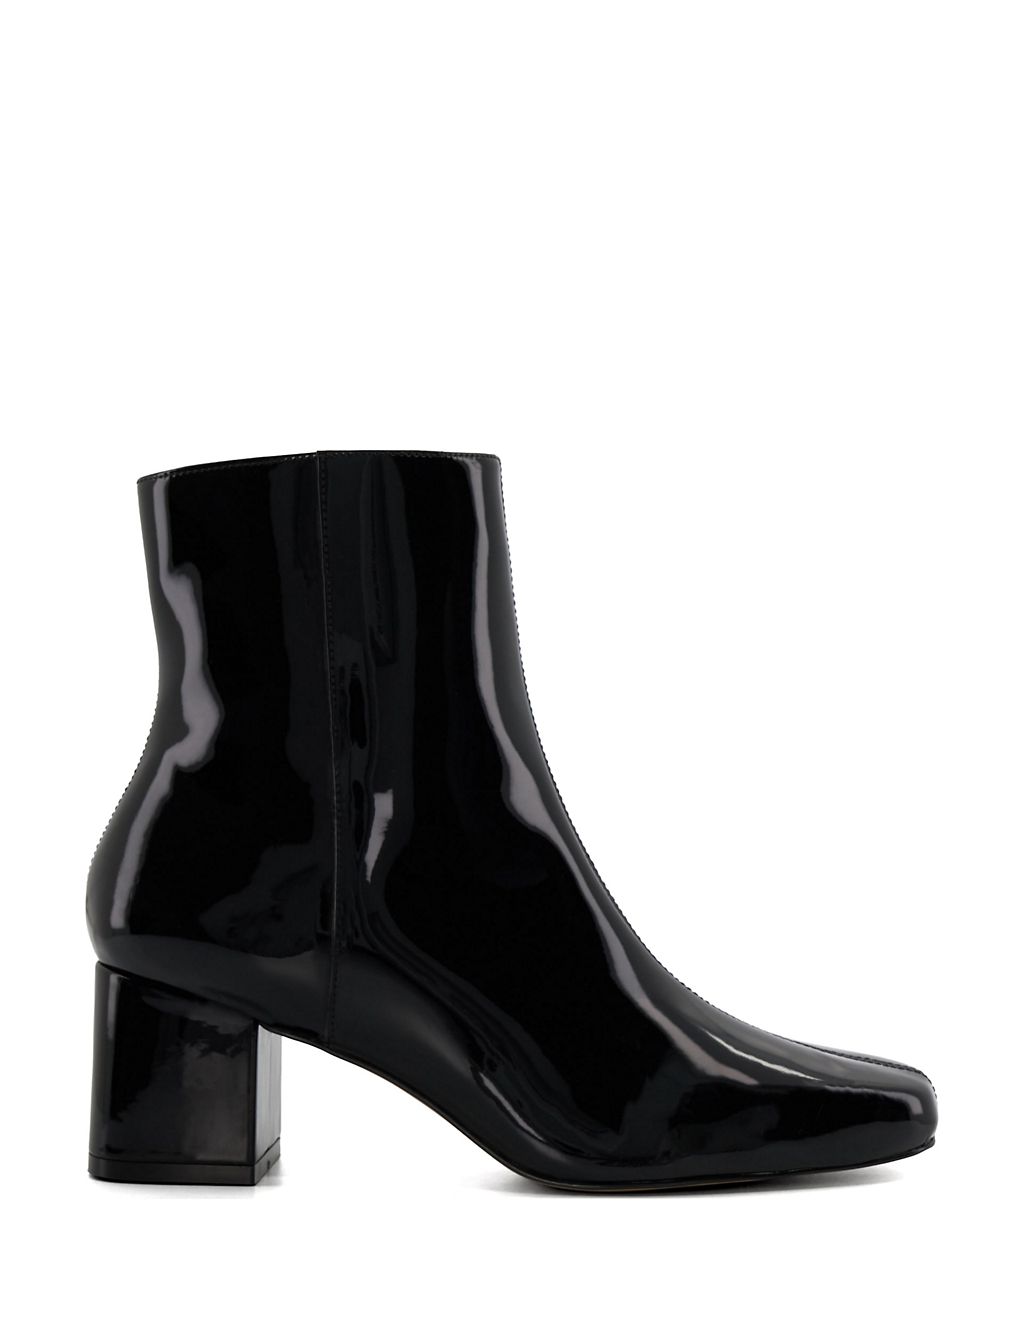 Leather Block Heel Square Toe Ankle Boots | Dune London | M&S